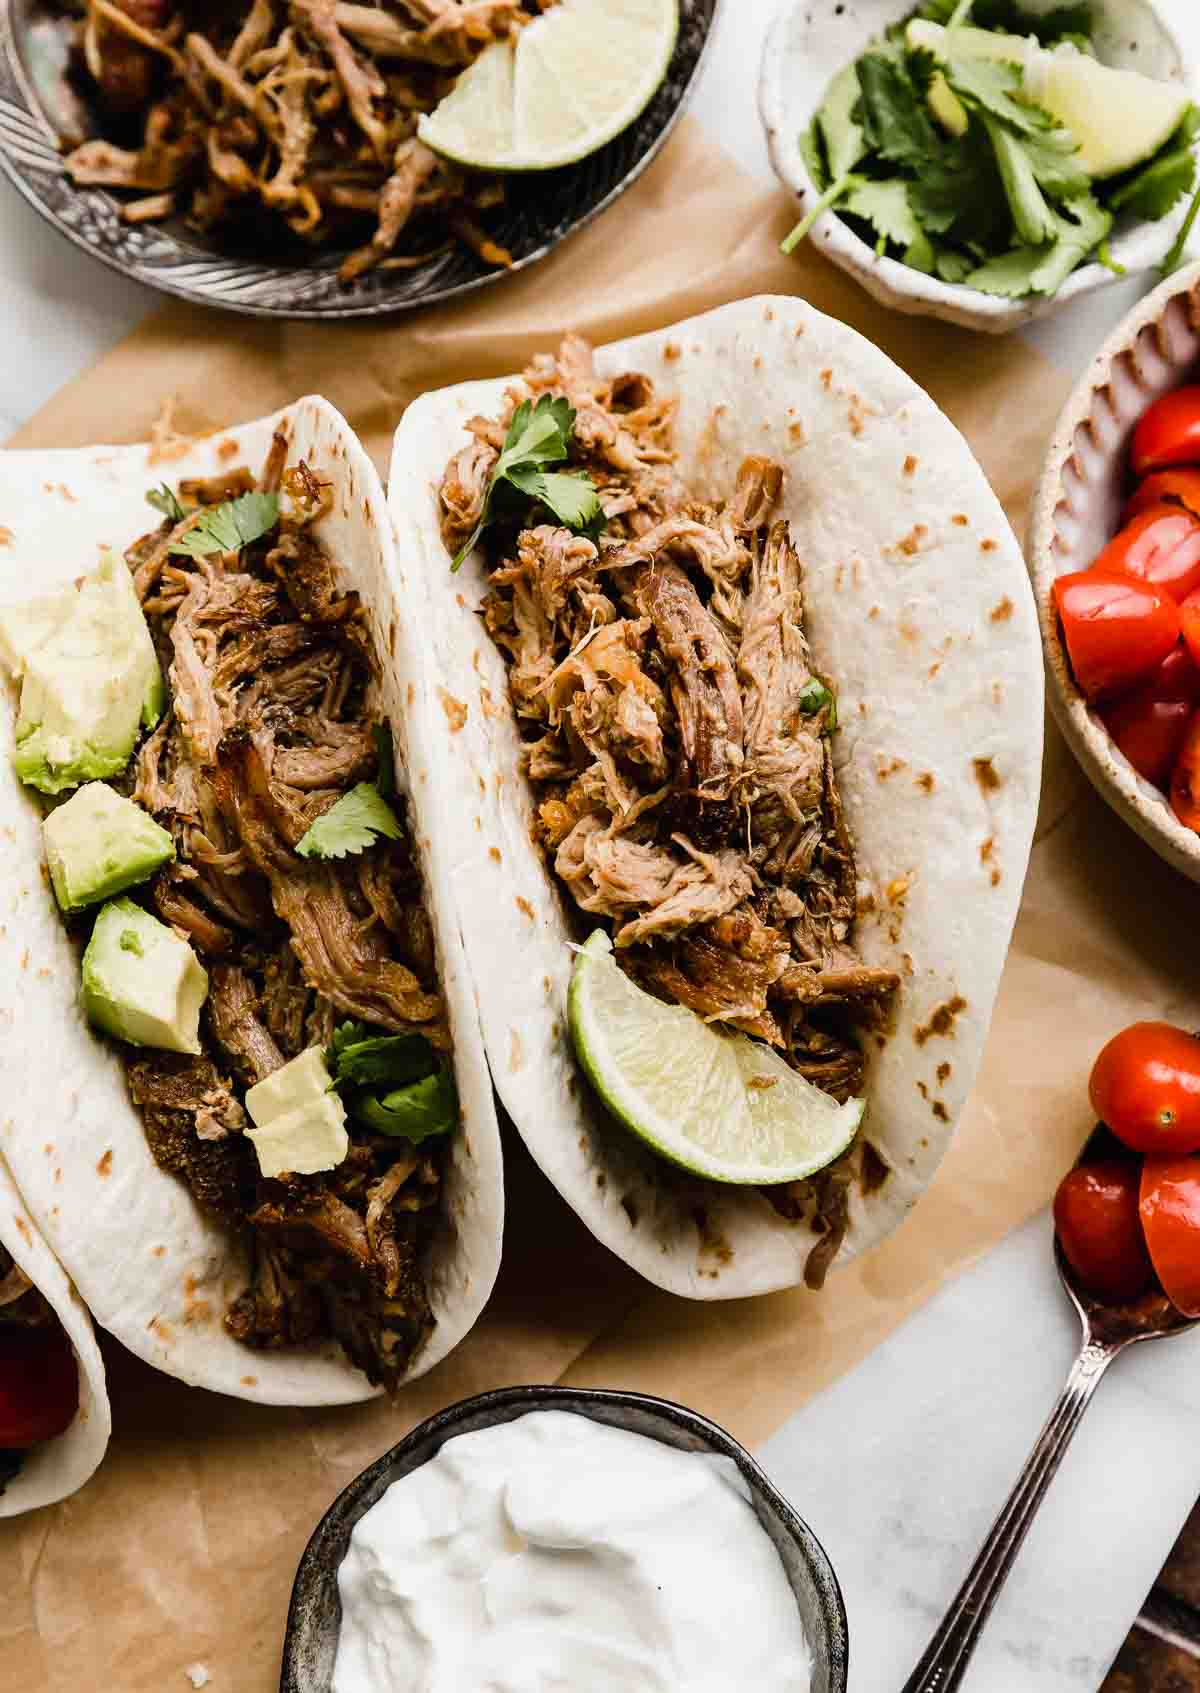 Two flour tortillas filled with slow cooker Mexican pulled pork carnitas, topped with chopped avocado and a side of tomatoes.